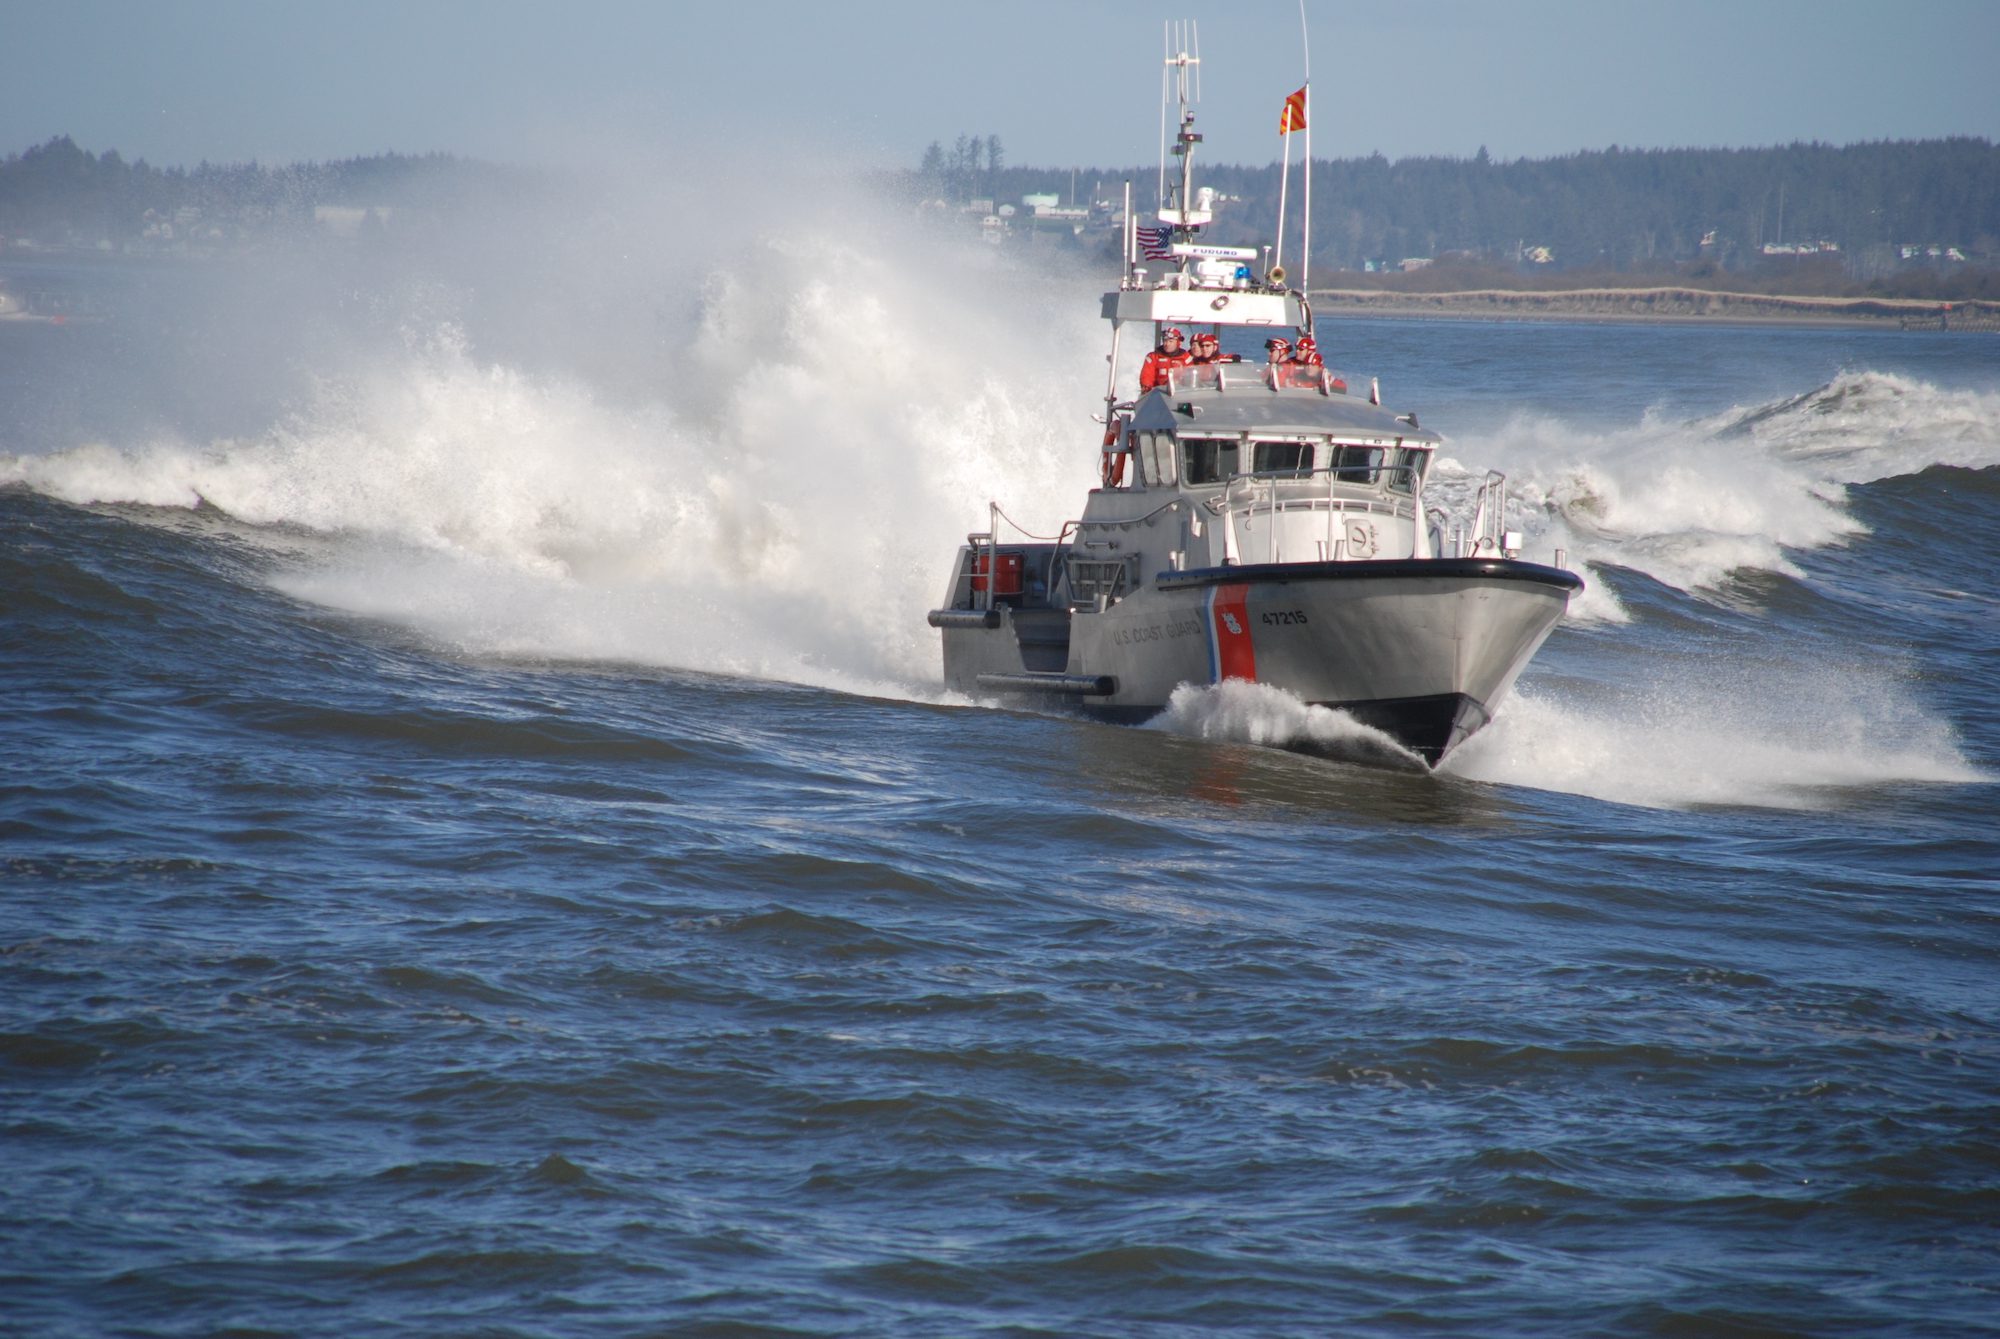 Columbia River Fishing Vessel Investigated for AIS Violation